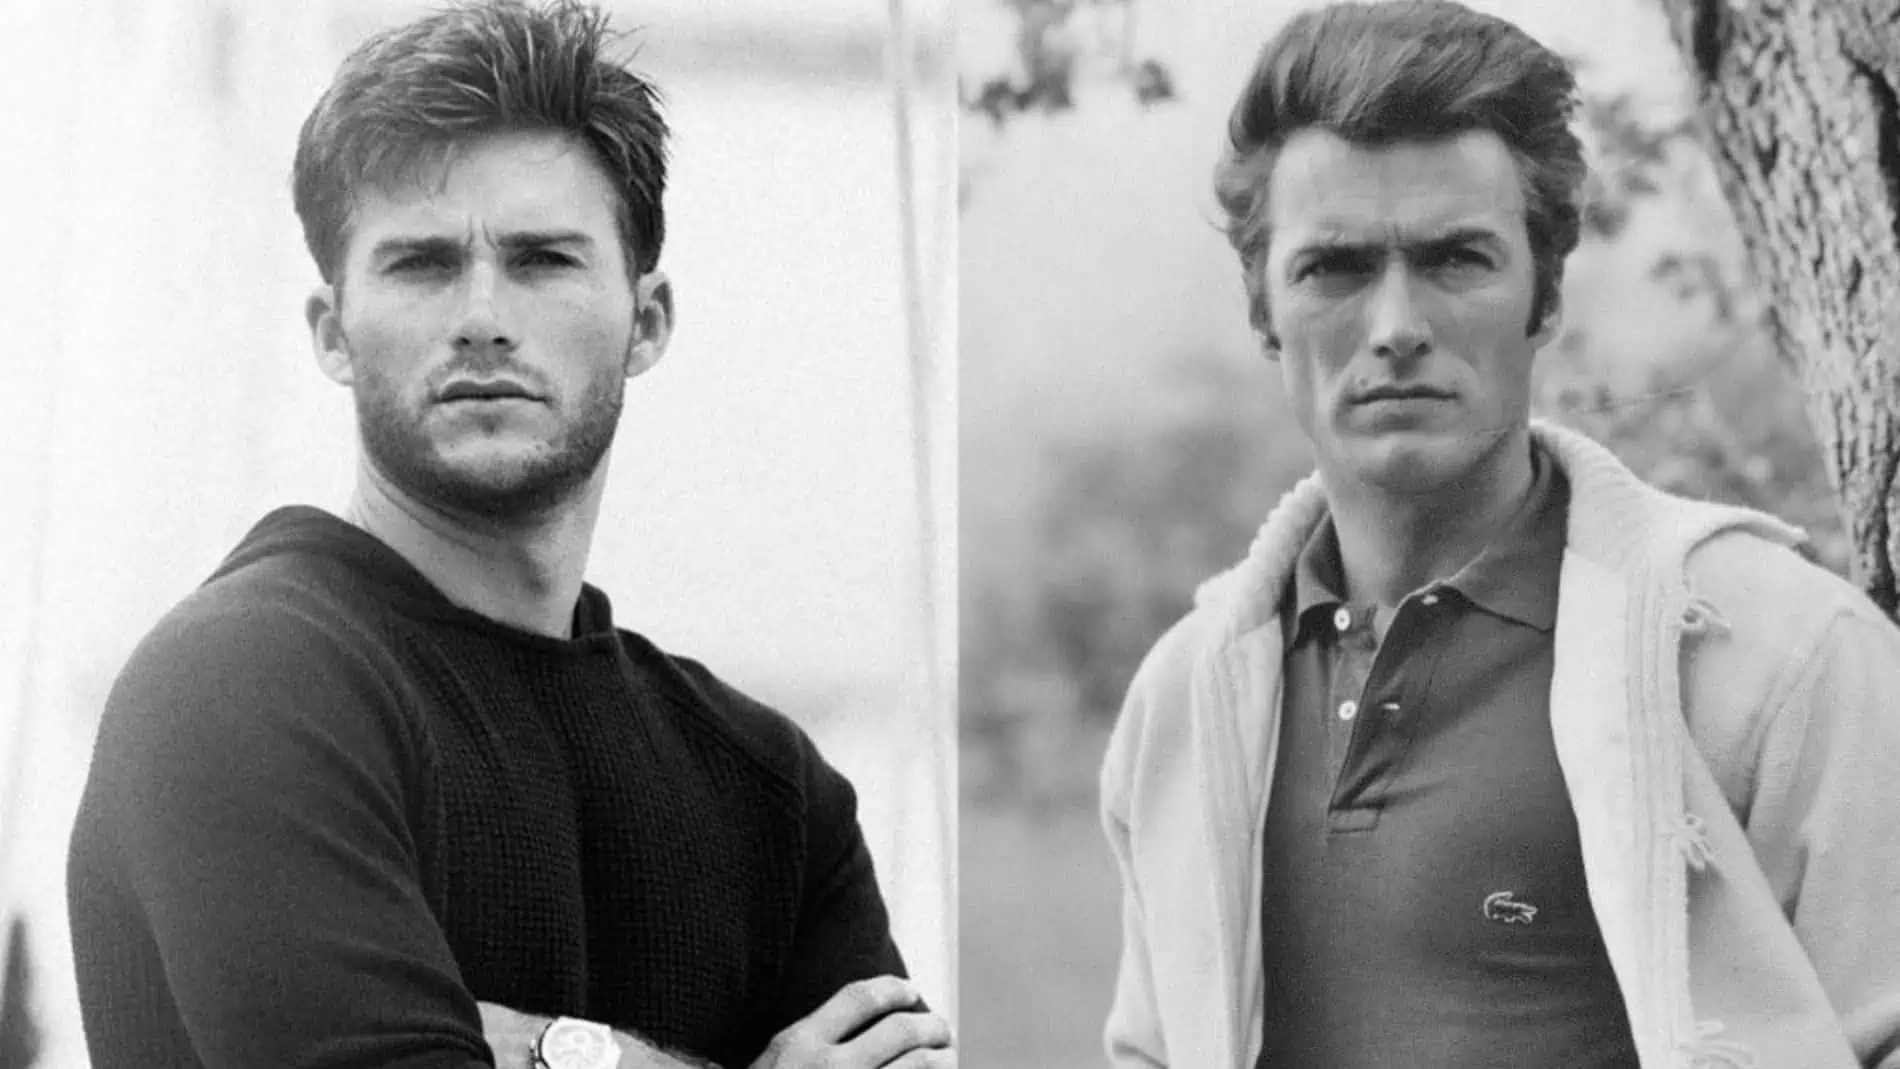 Scott, the youngest son of Clint Eastwood, is already an adult and looks like his father's twin